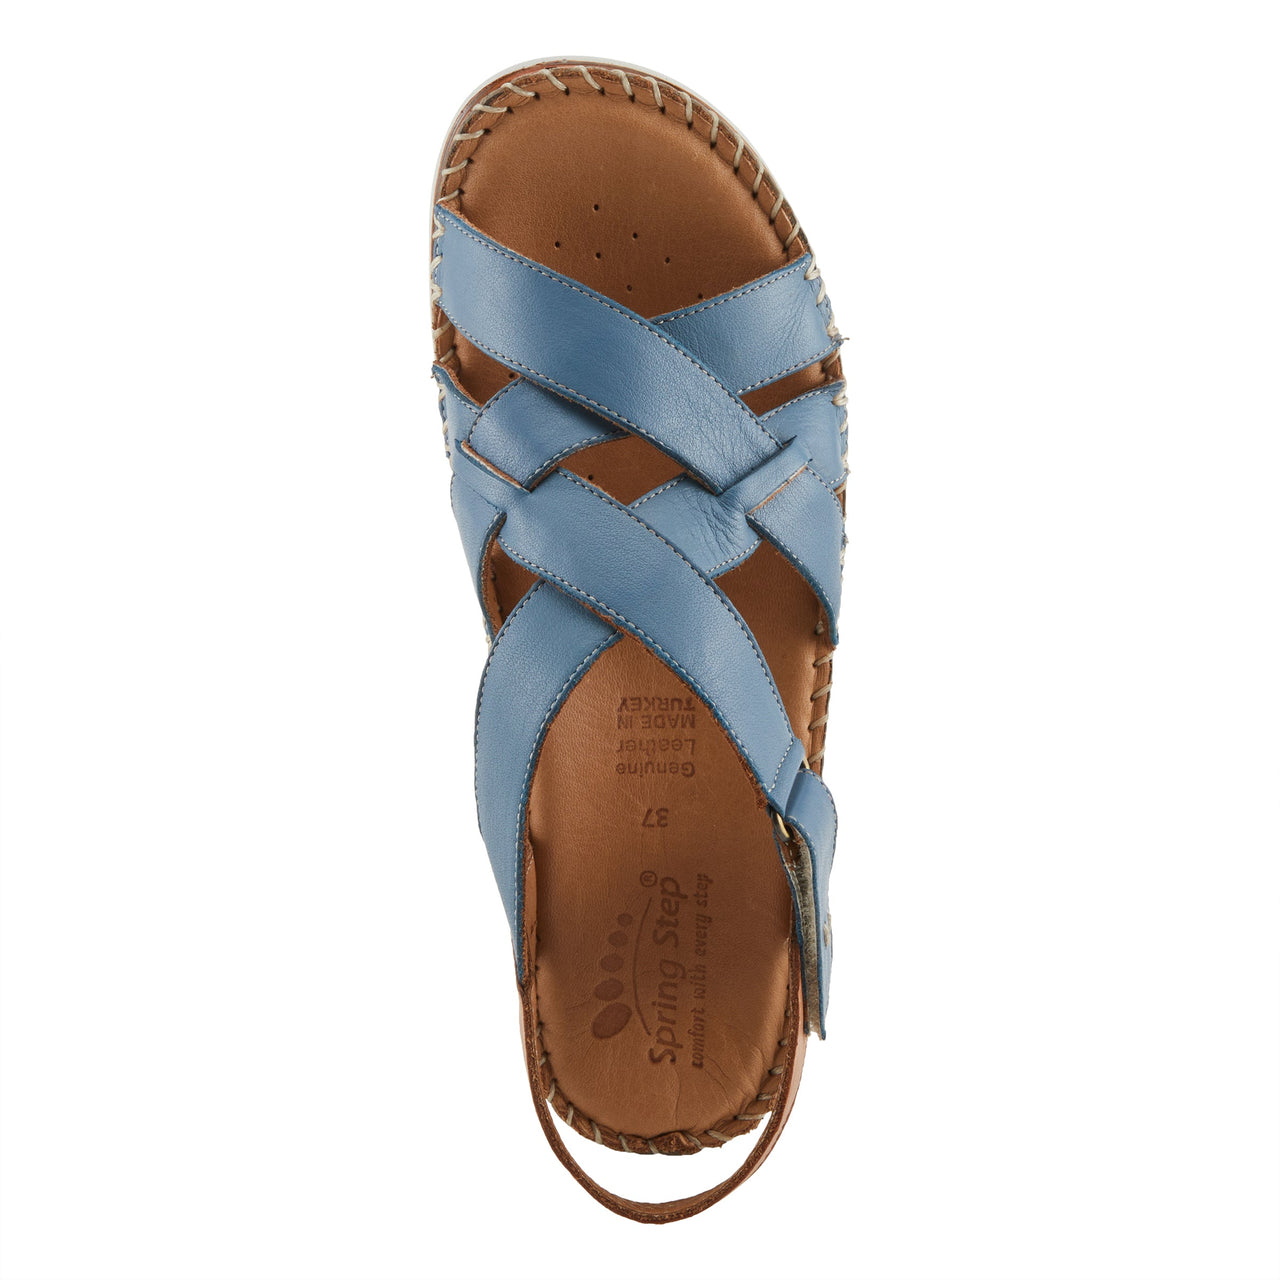 Stylish Spring Step Migula Sandals with adjustable straps and comfortable footbed